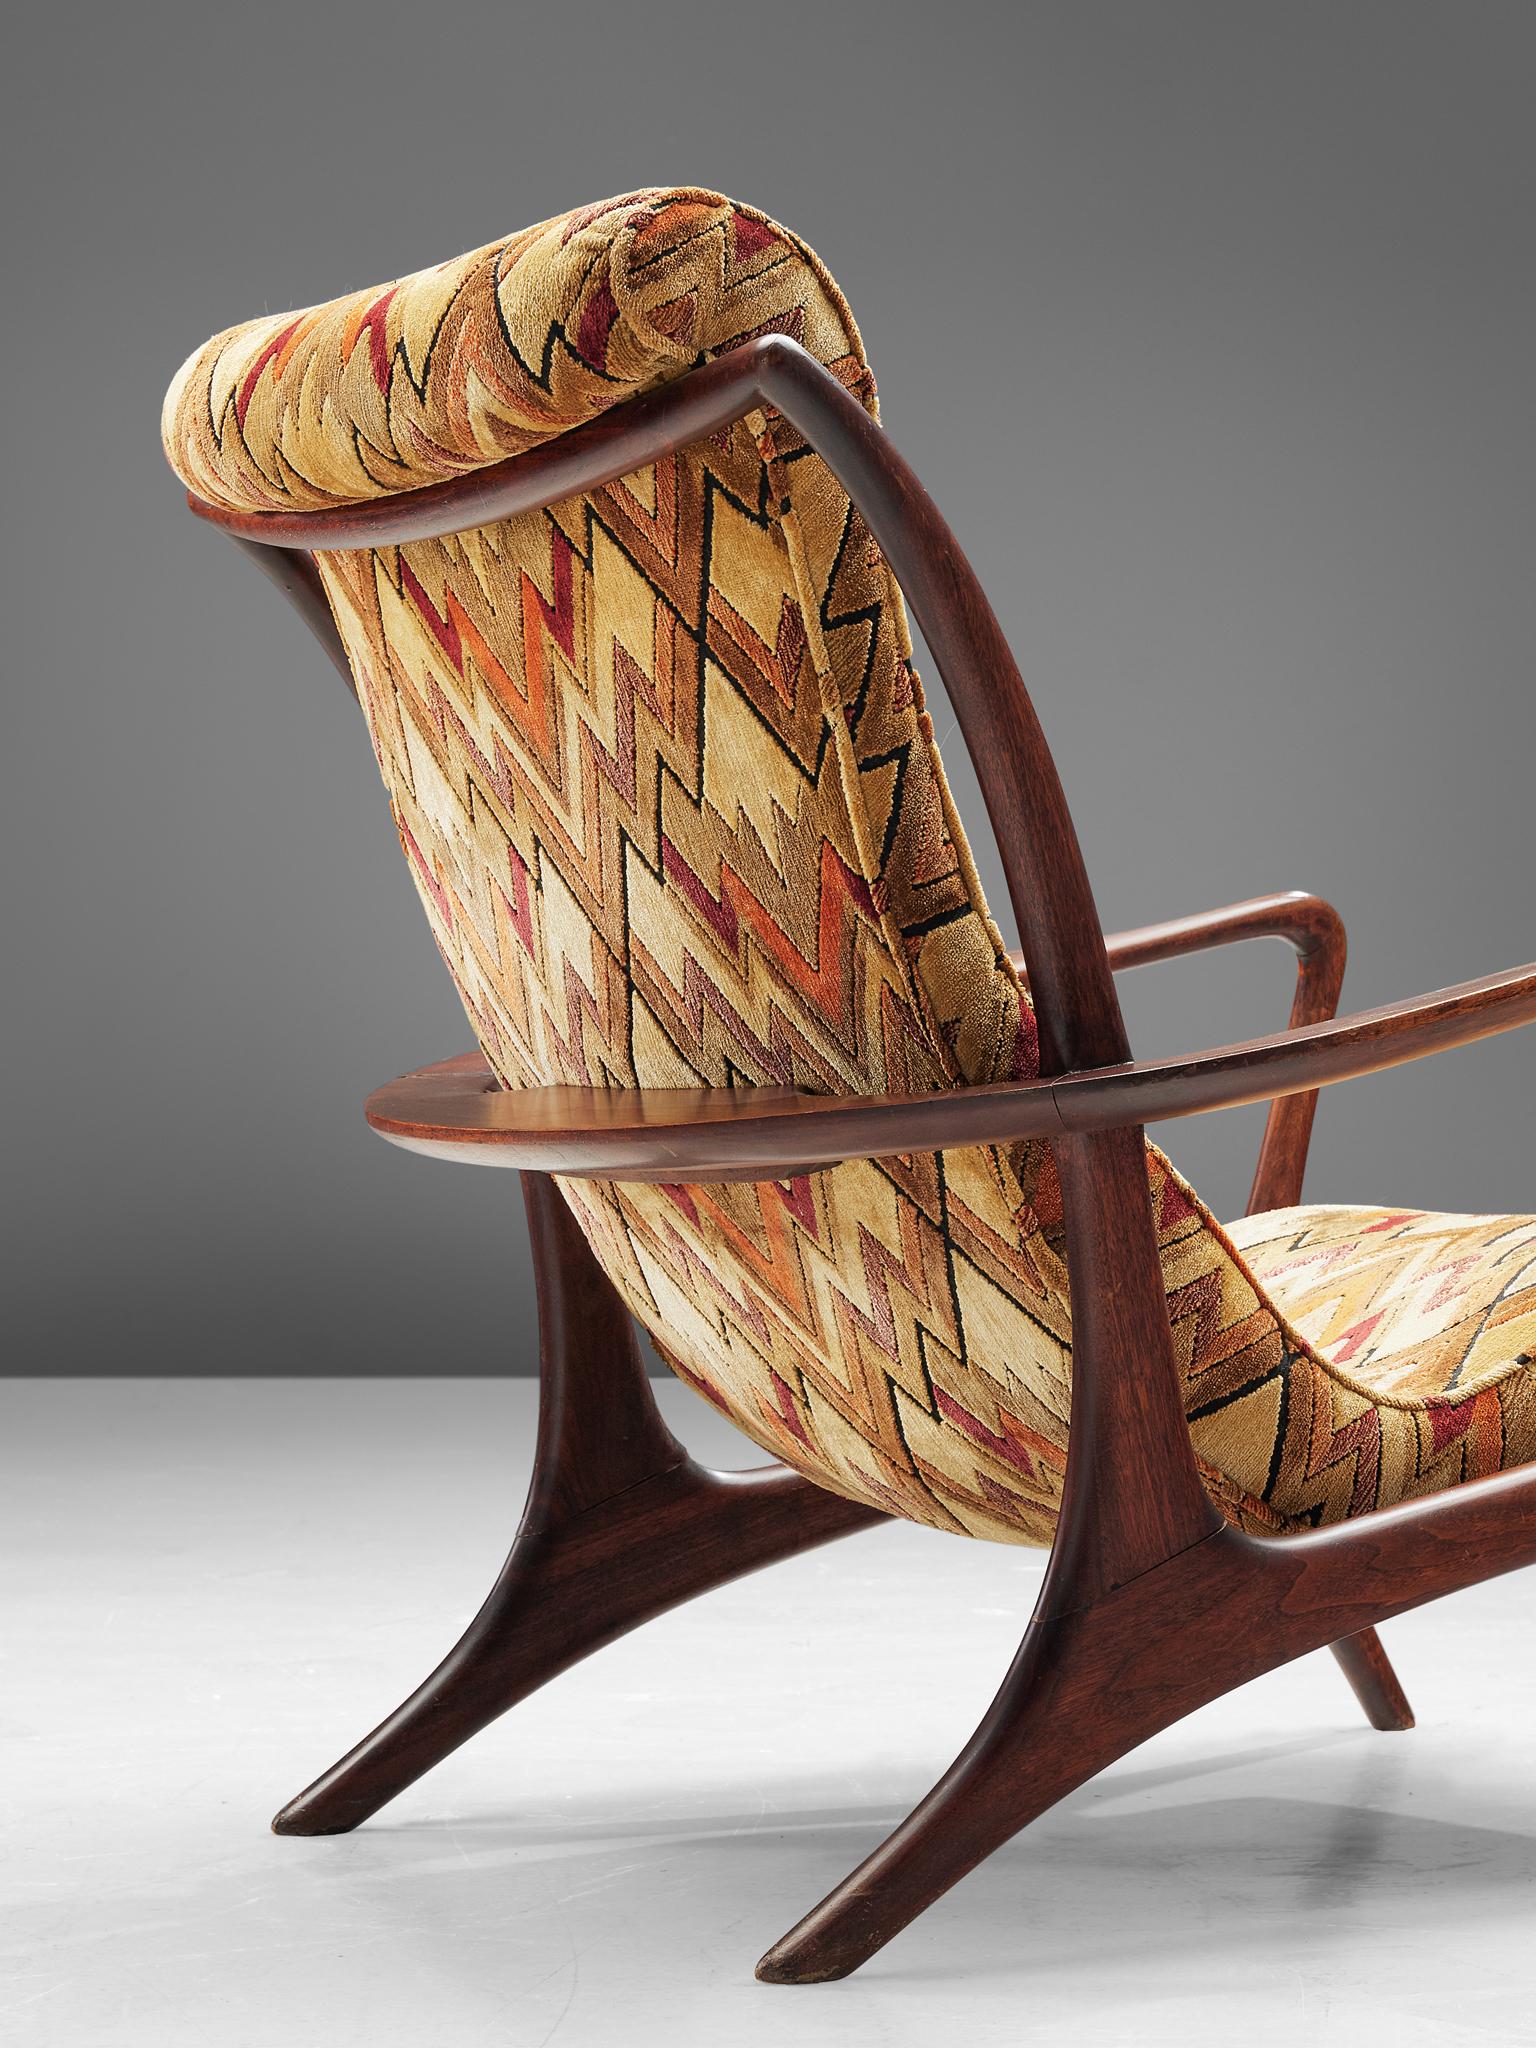 American Vladimir Kagan 'Contour' Lounge Chair in Patterned Upholstery